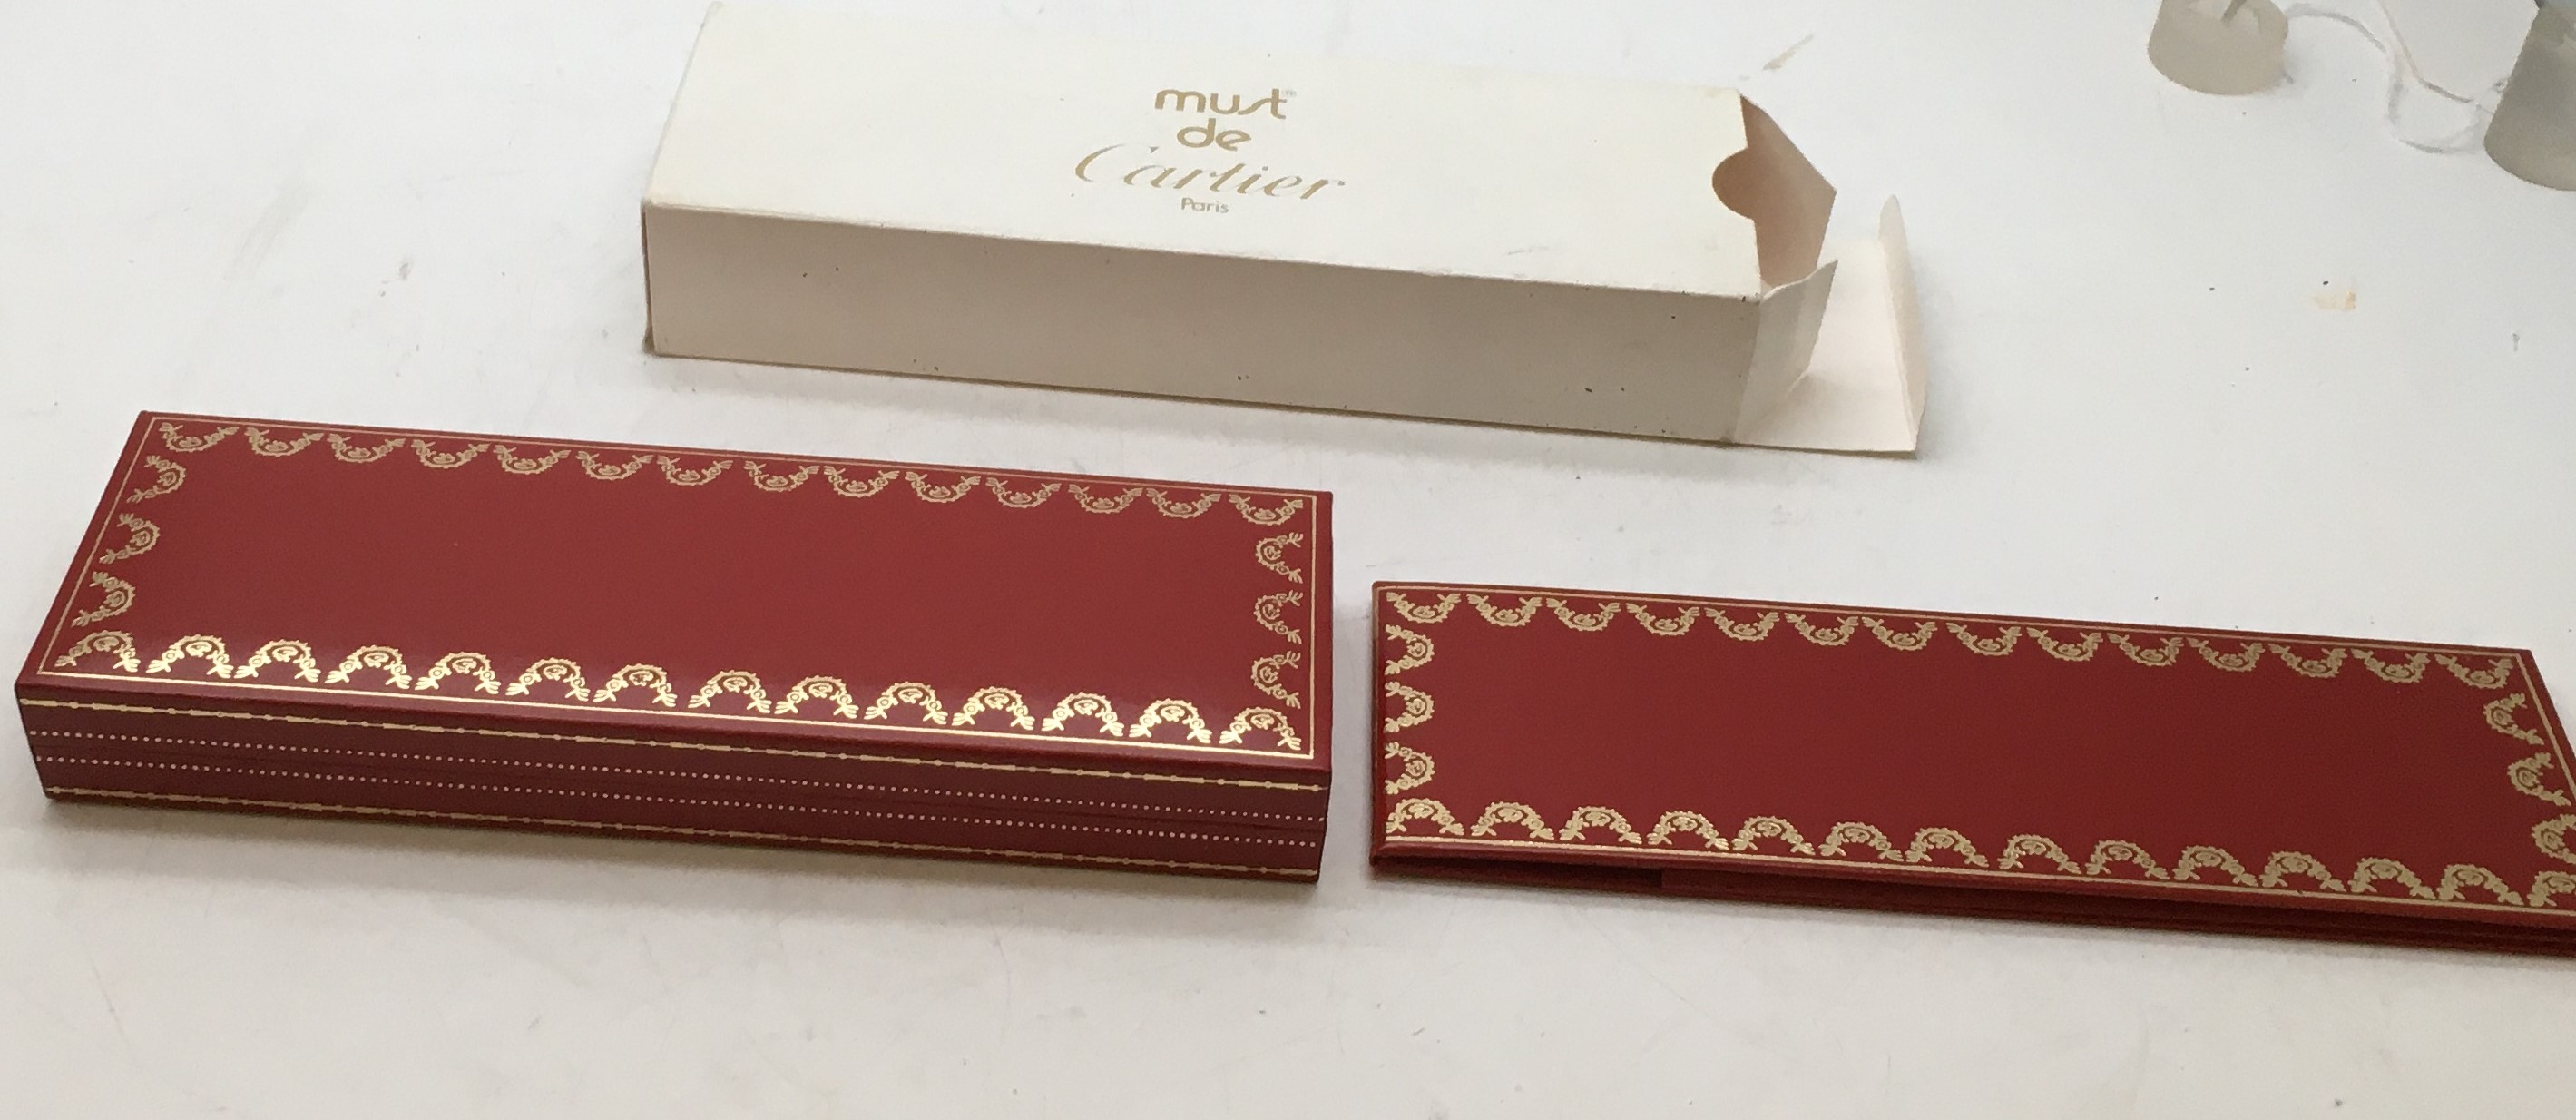 Cartier with original box and documents, packaging and outer packaging a burgundy and gold - Image 2 of 3